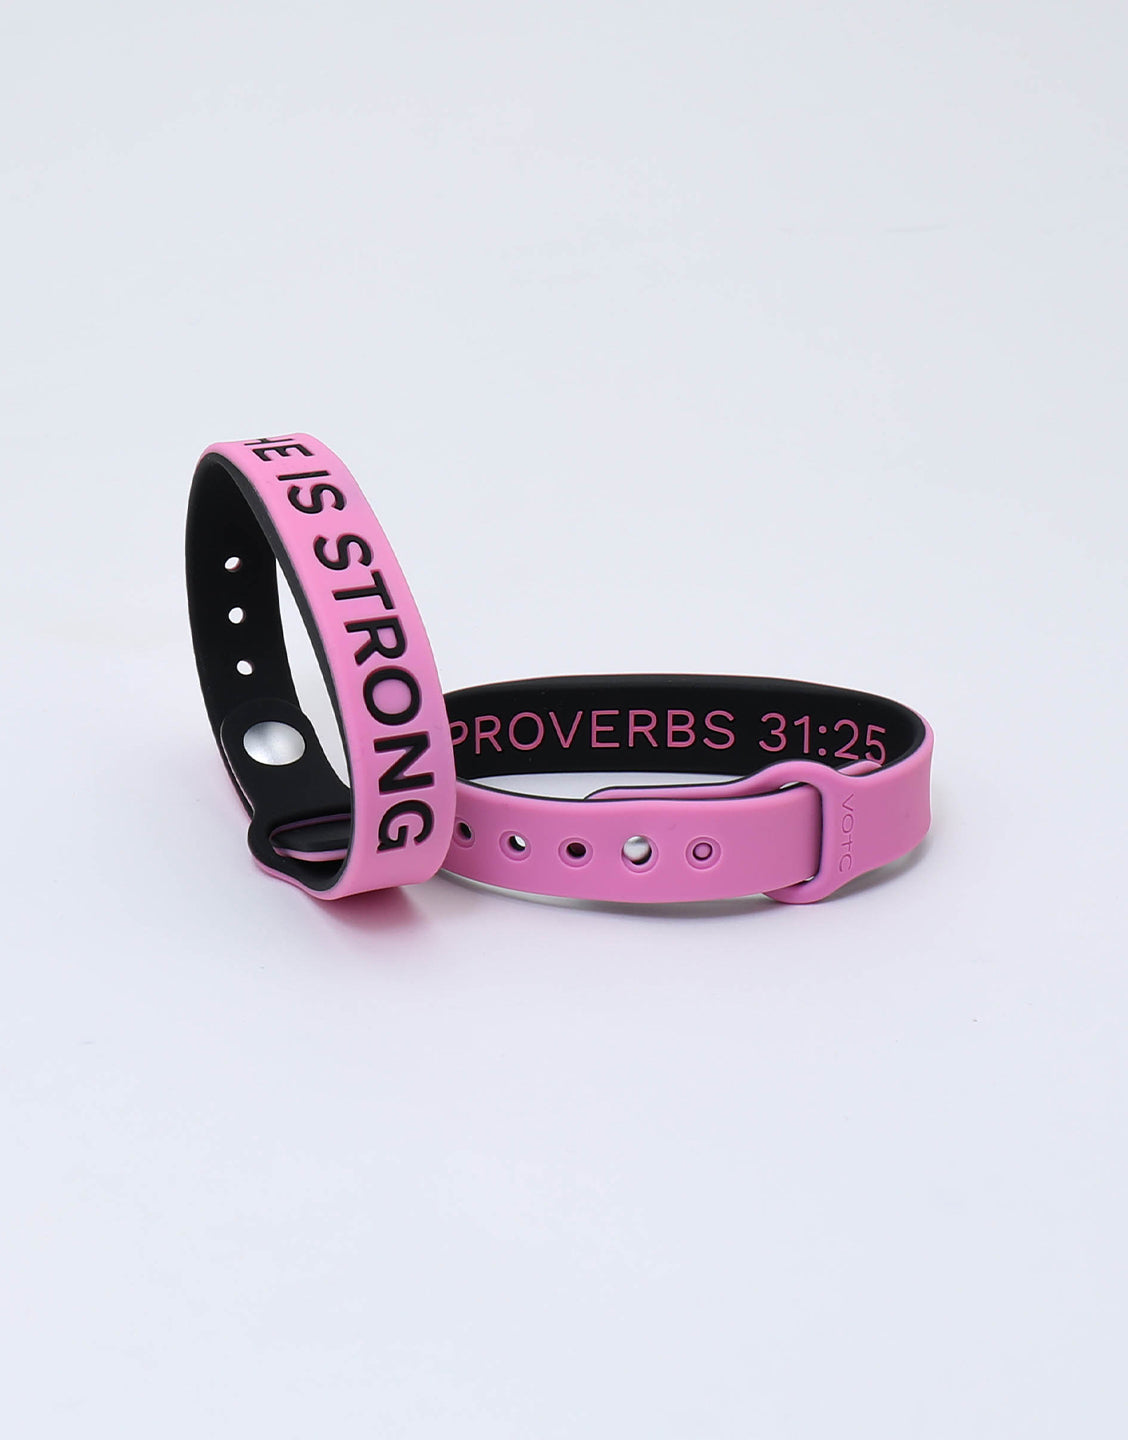 SHE IS STRONG Premium Silicone Wristband + Free Velvet Pouch- Pink